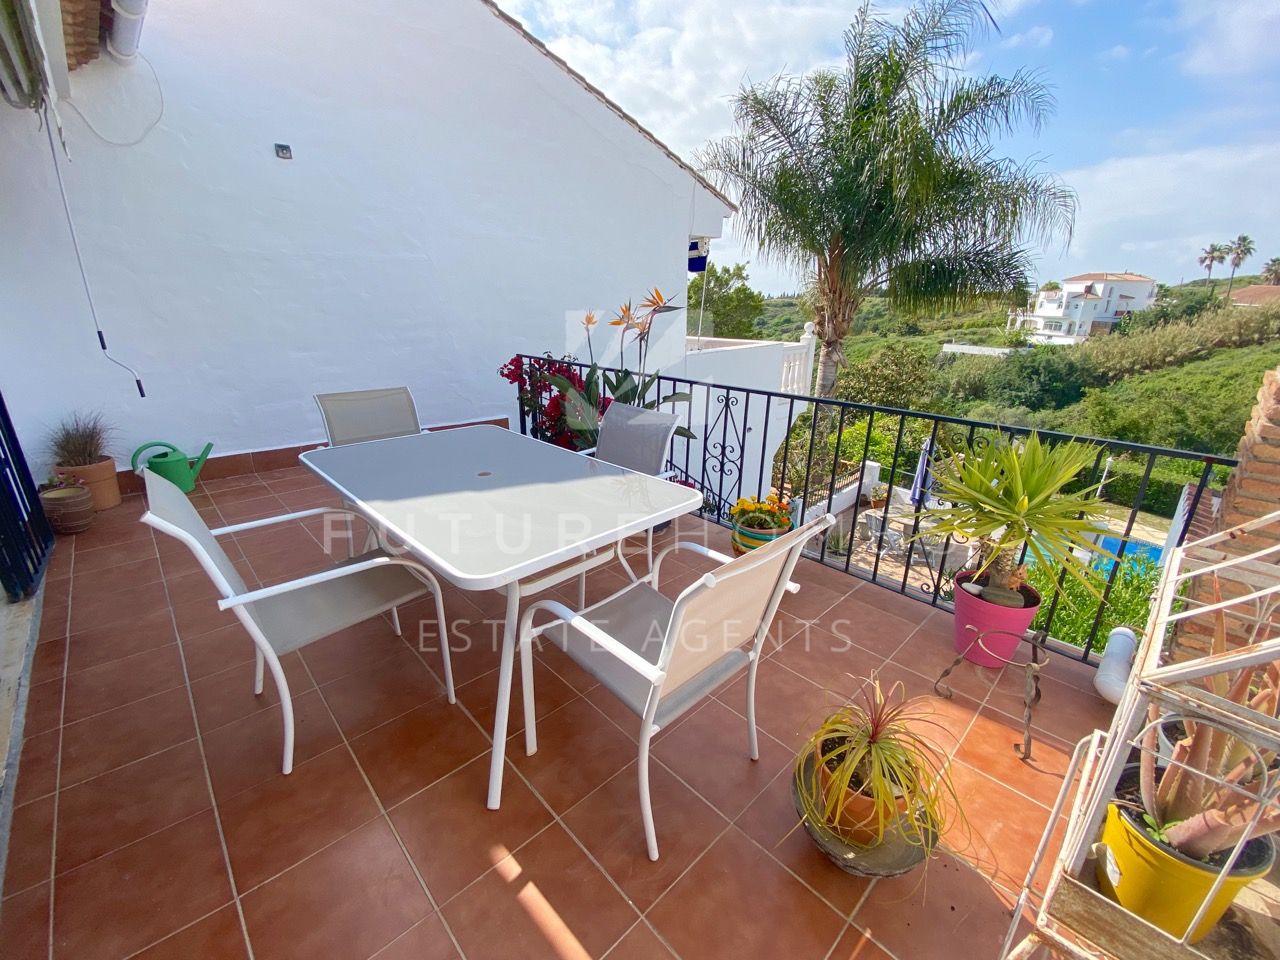 Well priced townhouse in quiet location yet only minutes from Estepona town centre